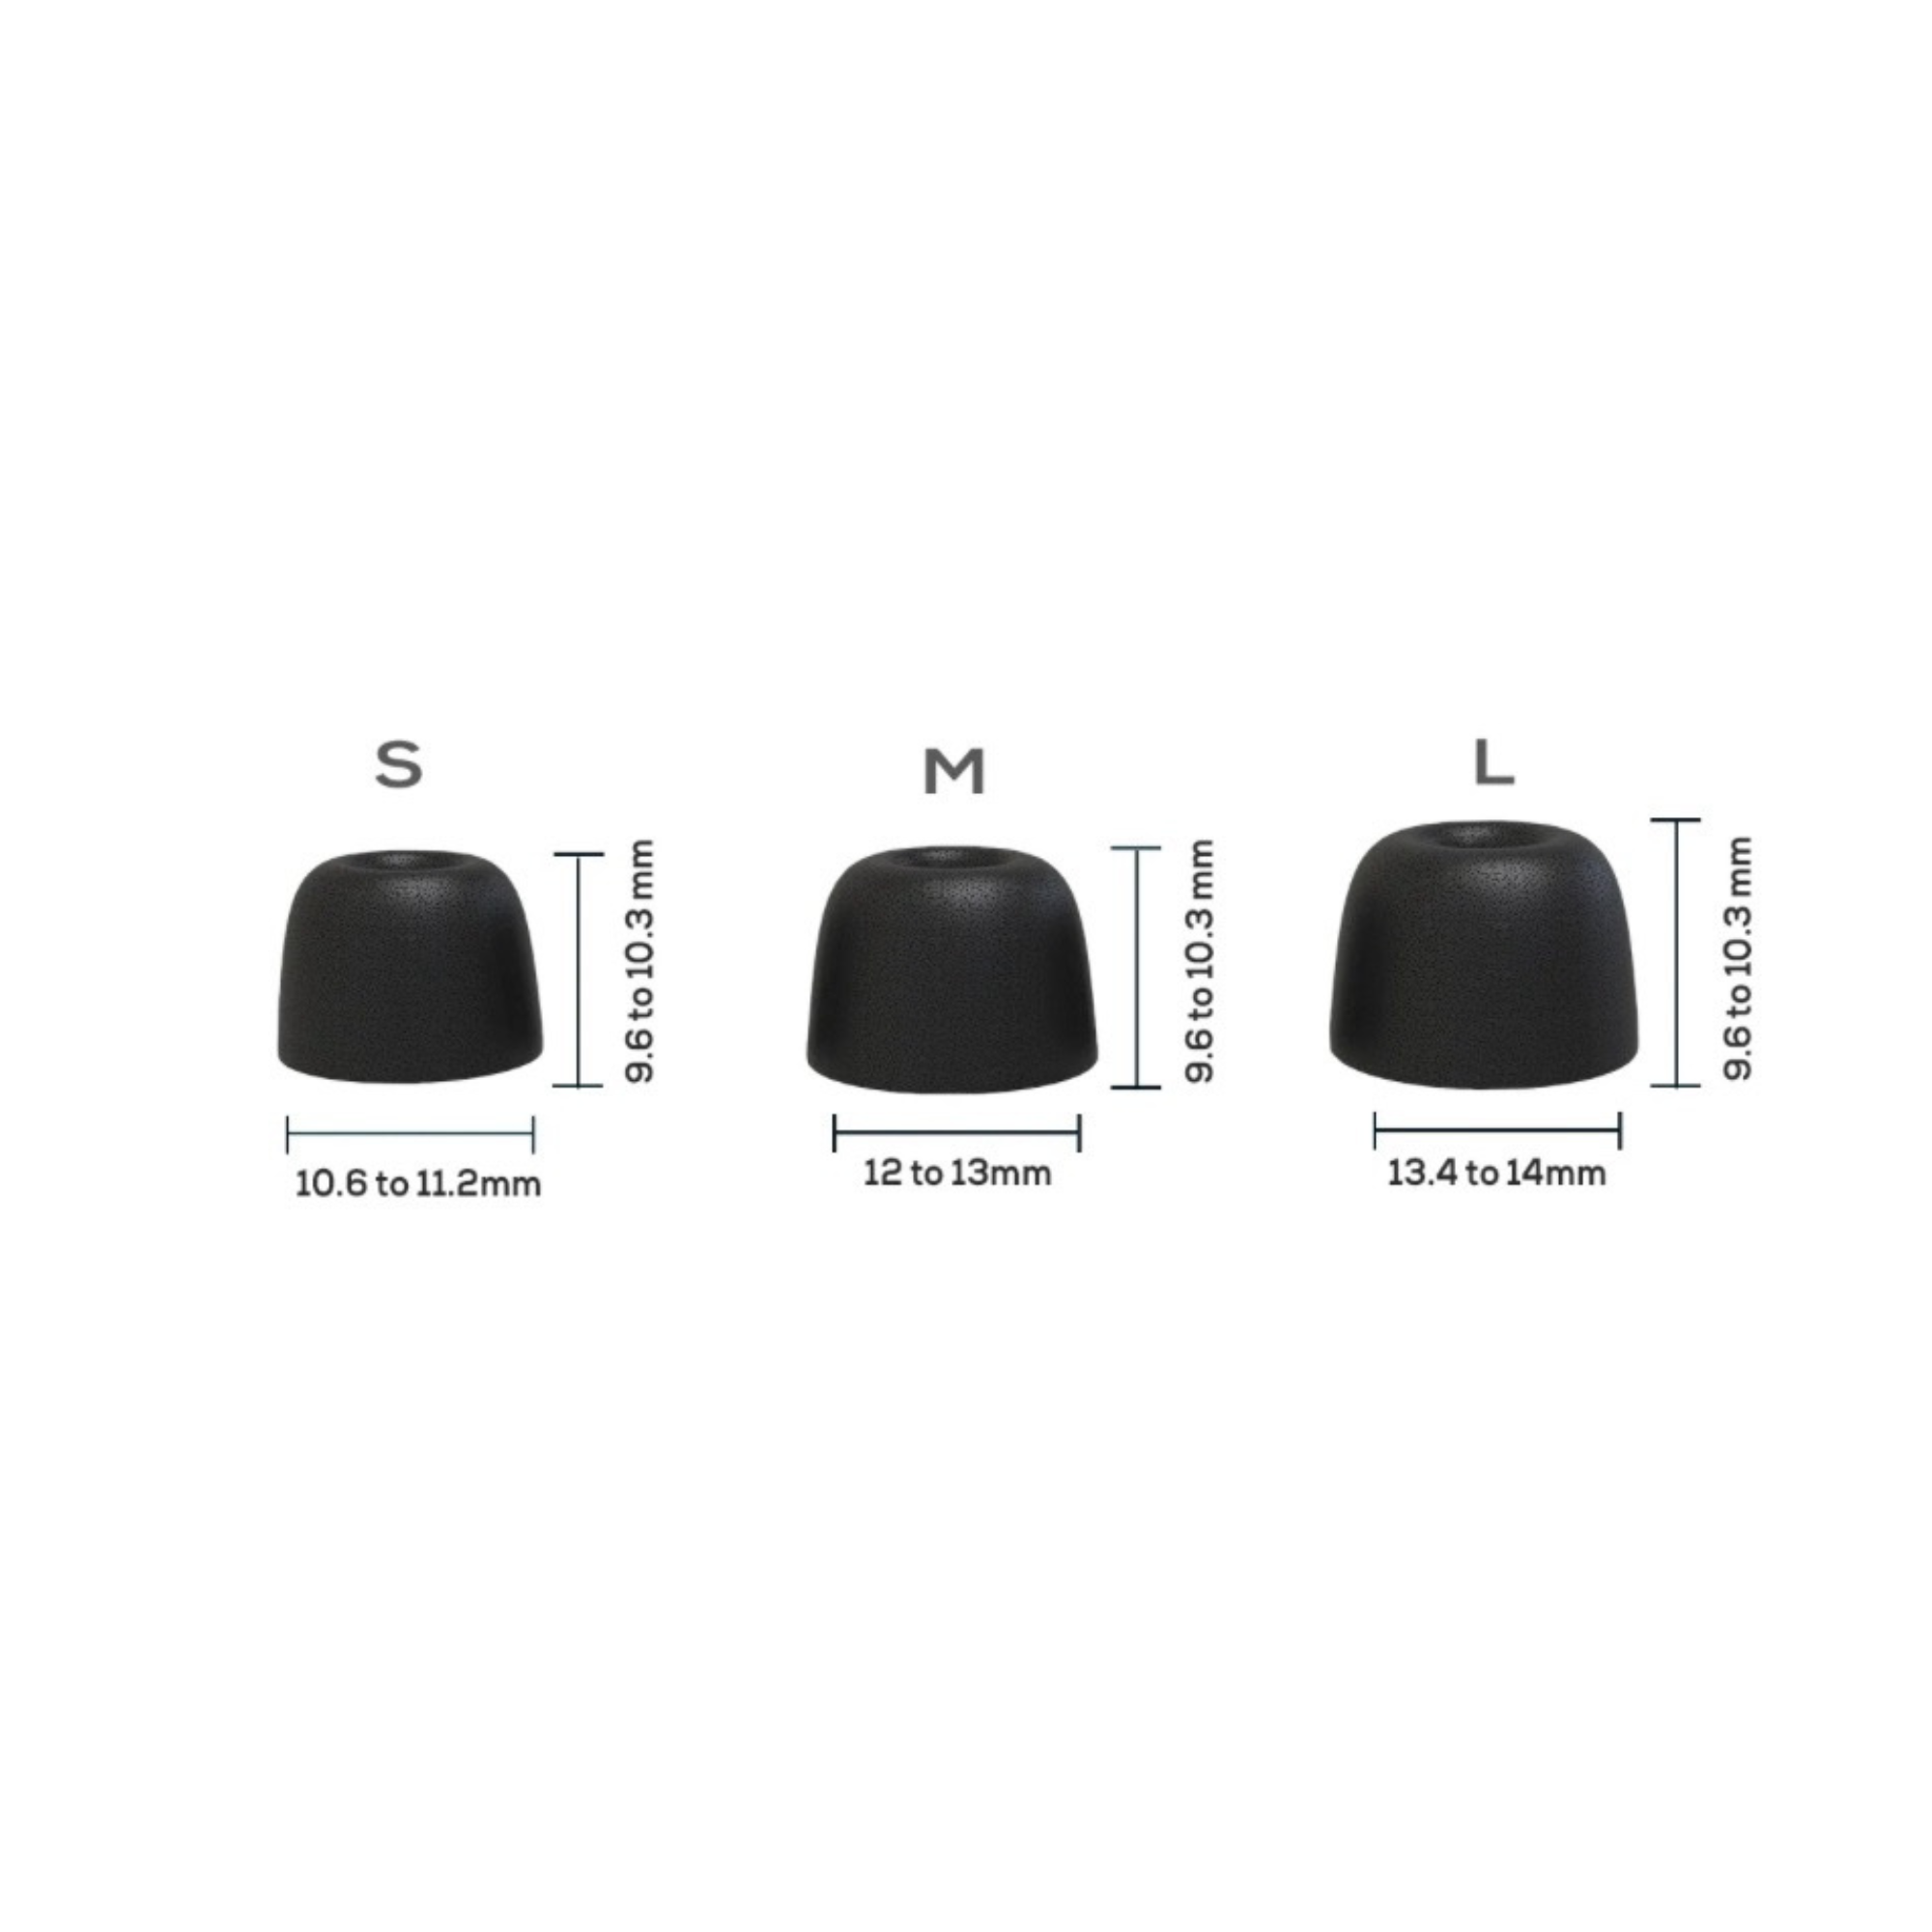 Black foam IEM tips with S, M, and L measurements.